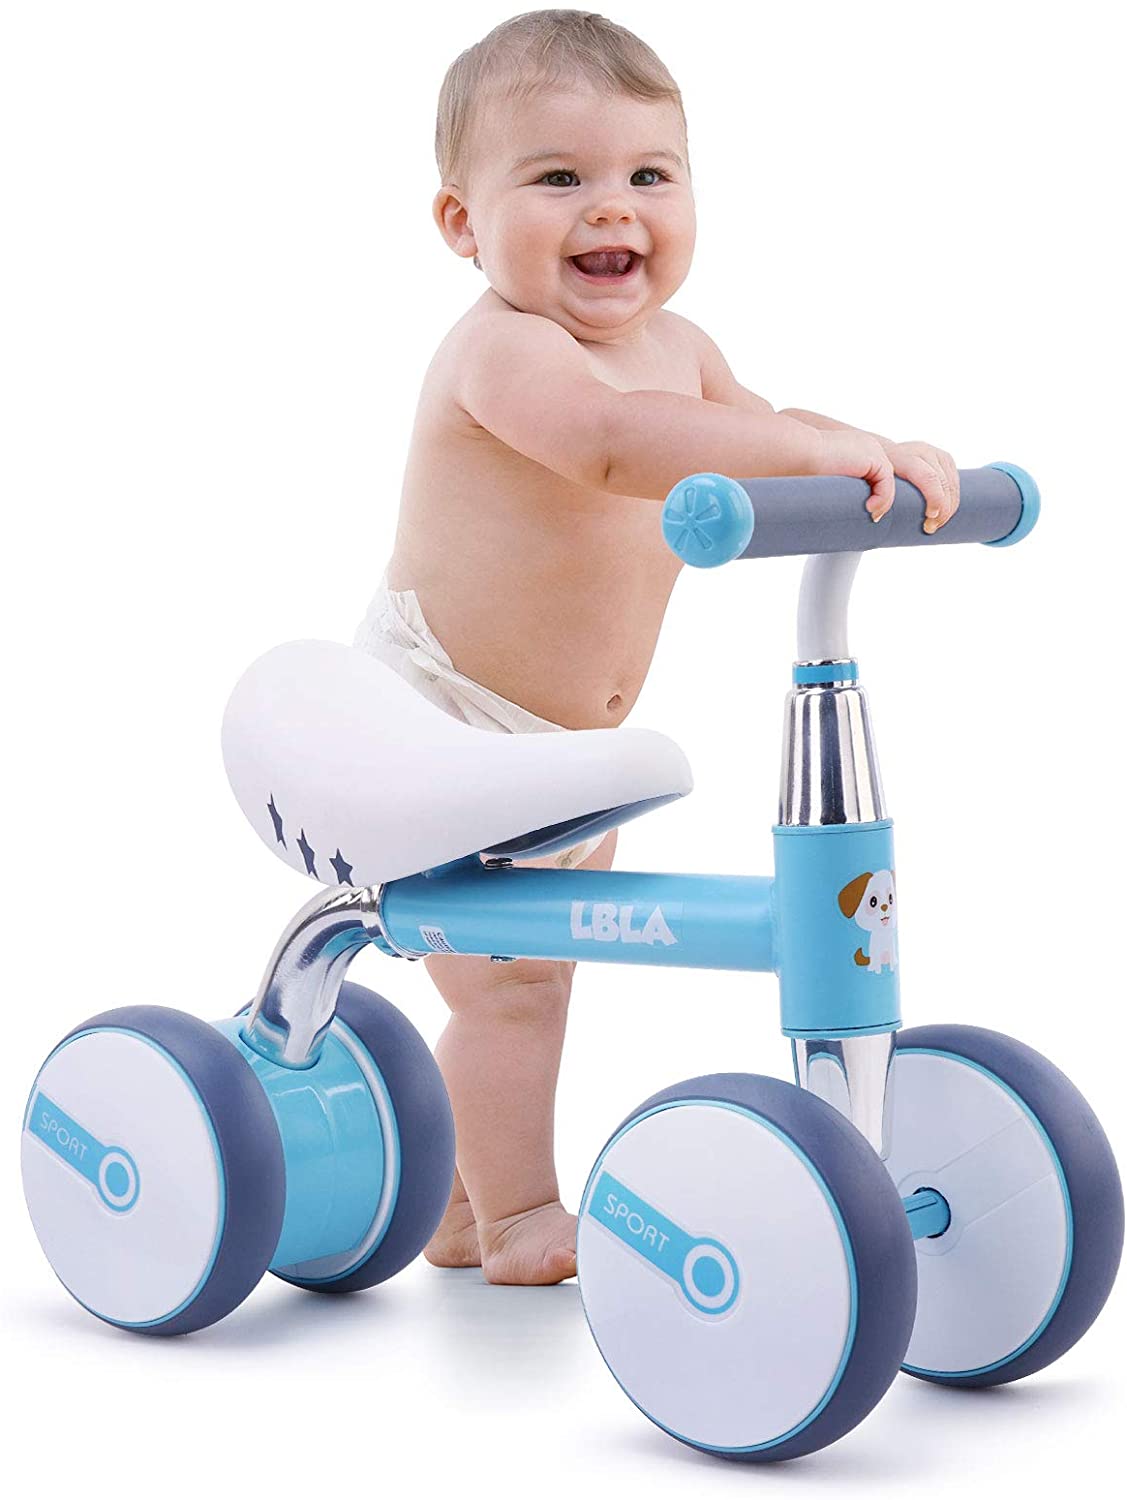 Factory Promotional Balance Bike With Cheap Price -  Arkmiido Children’s Balance Bike 10-36 Months without Pedals Toddler 4 Wheels Riding Toy for 1 Year Old Boys Girls (Blue) – Ealing